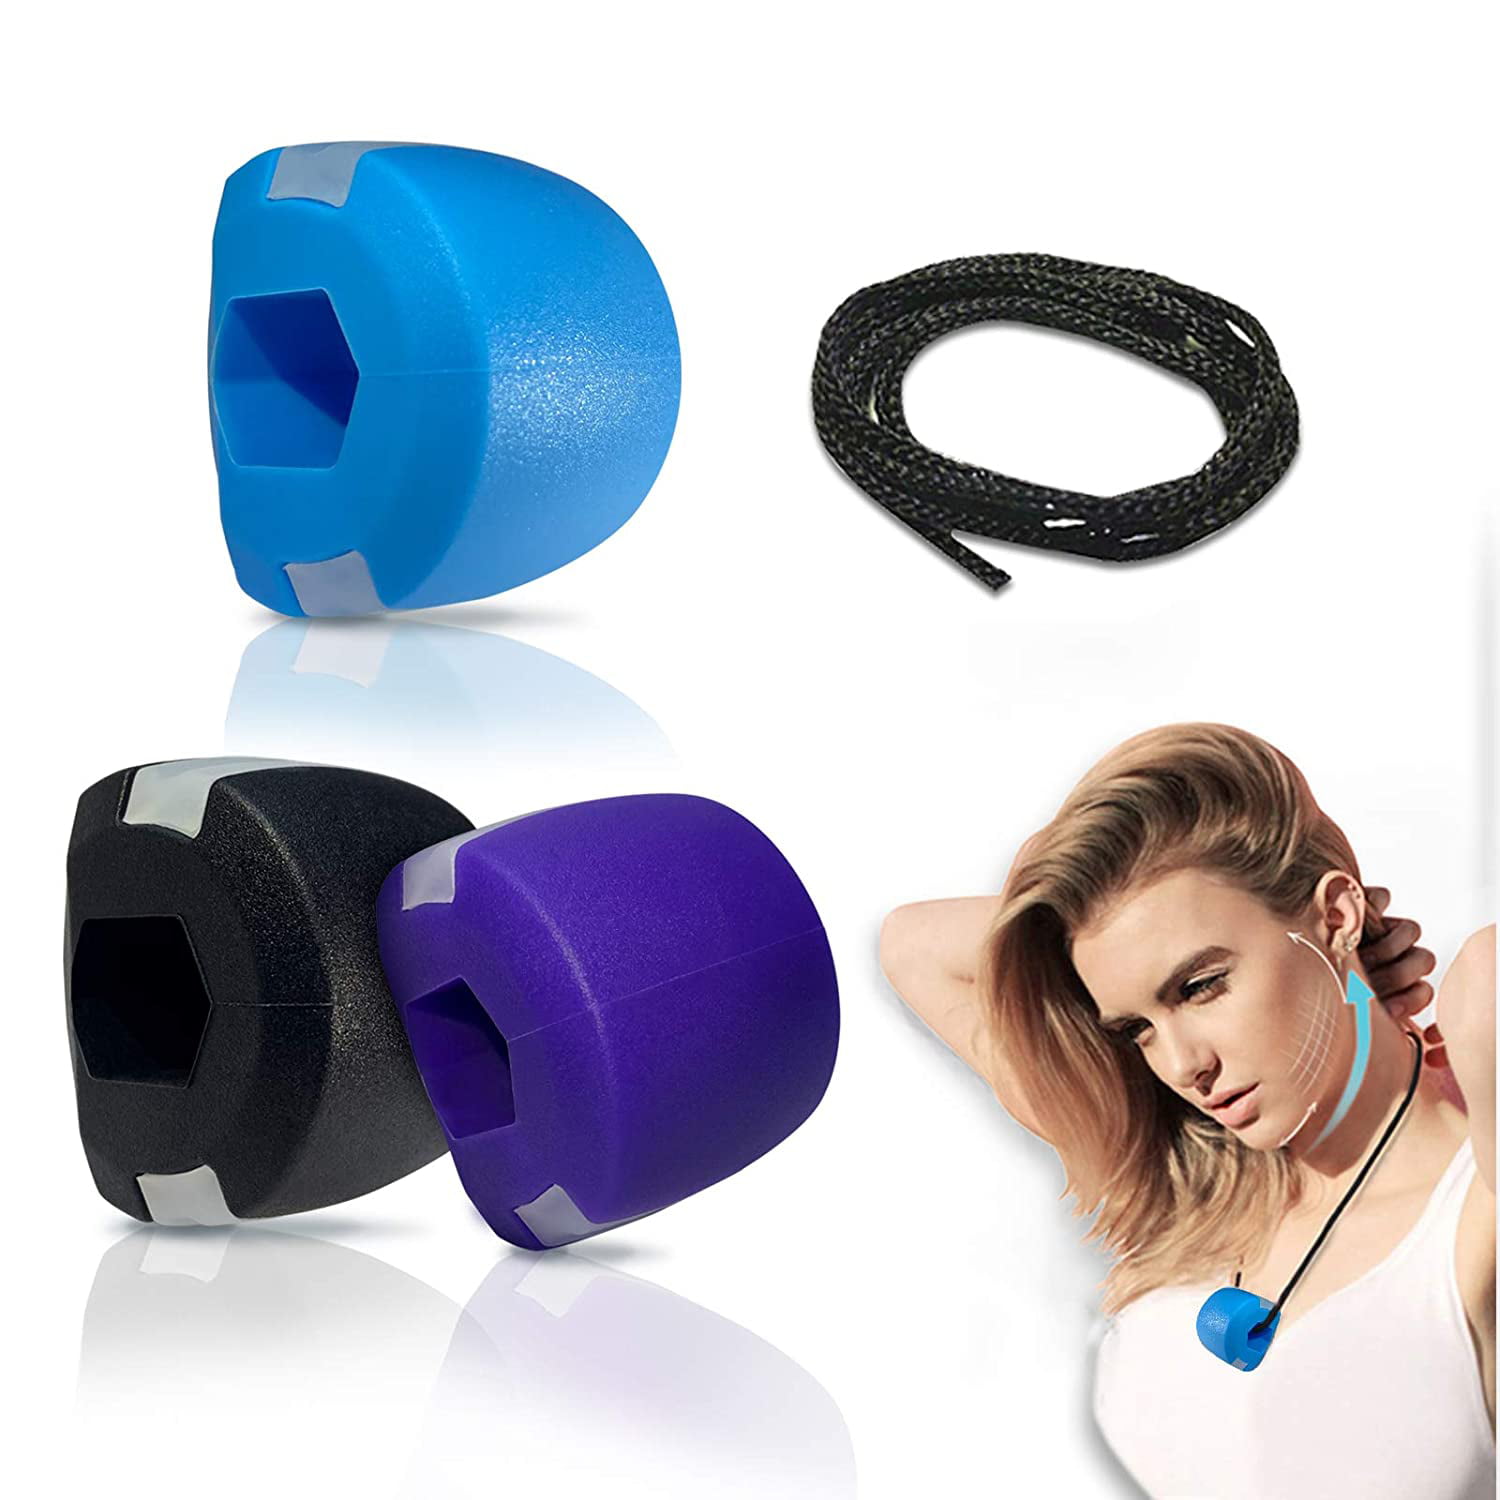 Slim Your Face Face and Neck Exerciser Define Your Jawline Face Fitness Ball Helps Reduce Stress and Cravings Facial Exerciser Black-Jaw Exerciser ZBT Jaw Exerciser